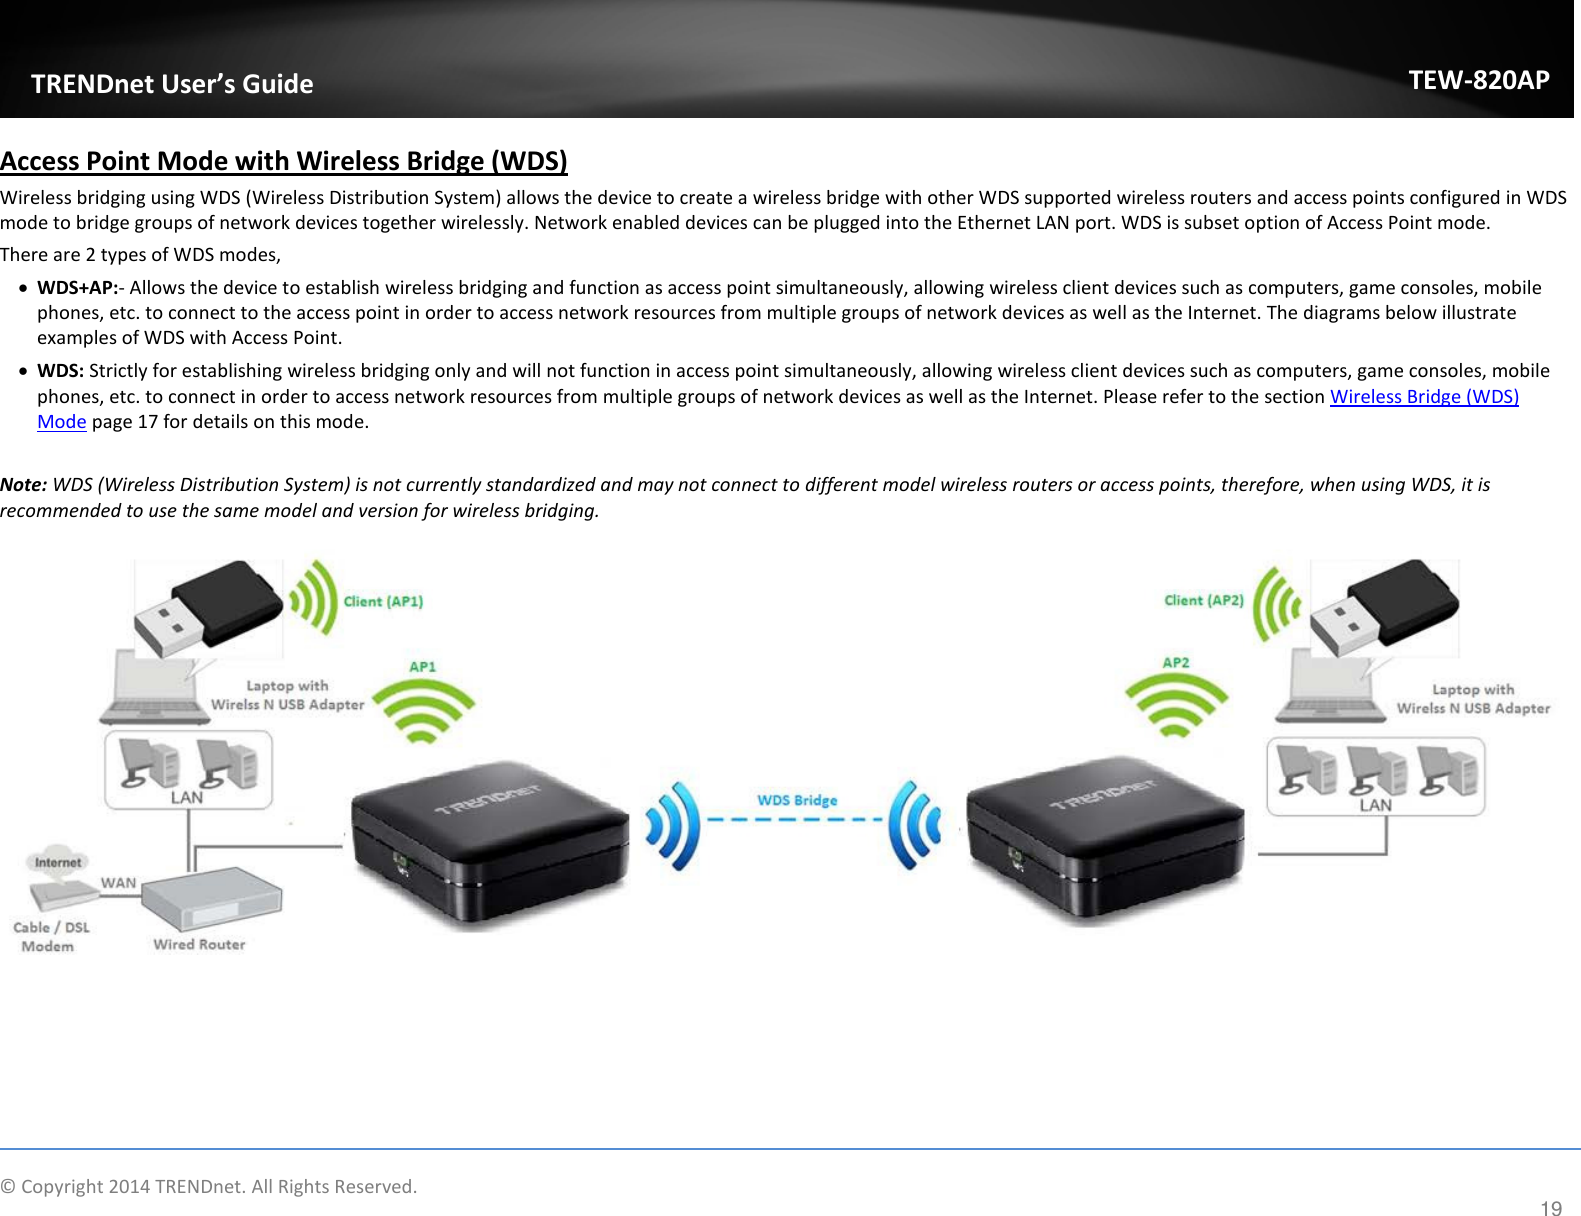             TRENDnet User’s Guide TEW-820AP Access Point Mode with Wireless Bridge (WDS)  Wireless bridging using WDS (Wireless Distribution System) allows the device to create a wireless bridge with other WDS supported wireless routers and access points configured in WDS mode to bridge groups of network devices together wirelessly. Network enabled devices can be plugged into the Ethernet LAN port. WDS is subset option of Access Point mode. There are 2 types of WDS modes,  • WDS+AP:- Allows the device to establish wireless bridging and function as access point simultaneously, allowing wireless client devices such as computers, game consoles, mobile phones, etc. to connect to the access point in order to access network resources from multiple groups of network devices as well as the Internet. The diagrams below illustrate examples of WDS with Access Point. • WDS: Strictly for establishing wireless bridging only and will not function in access point simultaneously, allowing wireless client devices such as computers, game consoles, mobile phones, etc. to connect in order to access network resources from multiple groups of network devices as well as the Internet. Please refer to the section Wireless Bridge (WDS) Mode page 17 for details on this mode.  Note: WDS (Wireless Distribution System) is not currently standardized and may not connect to different model wireless routers or access points, therefore, when using WDS, it is recommended to use the same model and version for wireless bridging.   © Copyright 2014 TRENDnet. All Rights Reserved.      19 